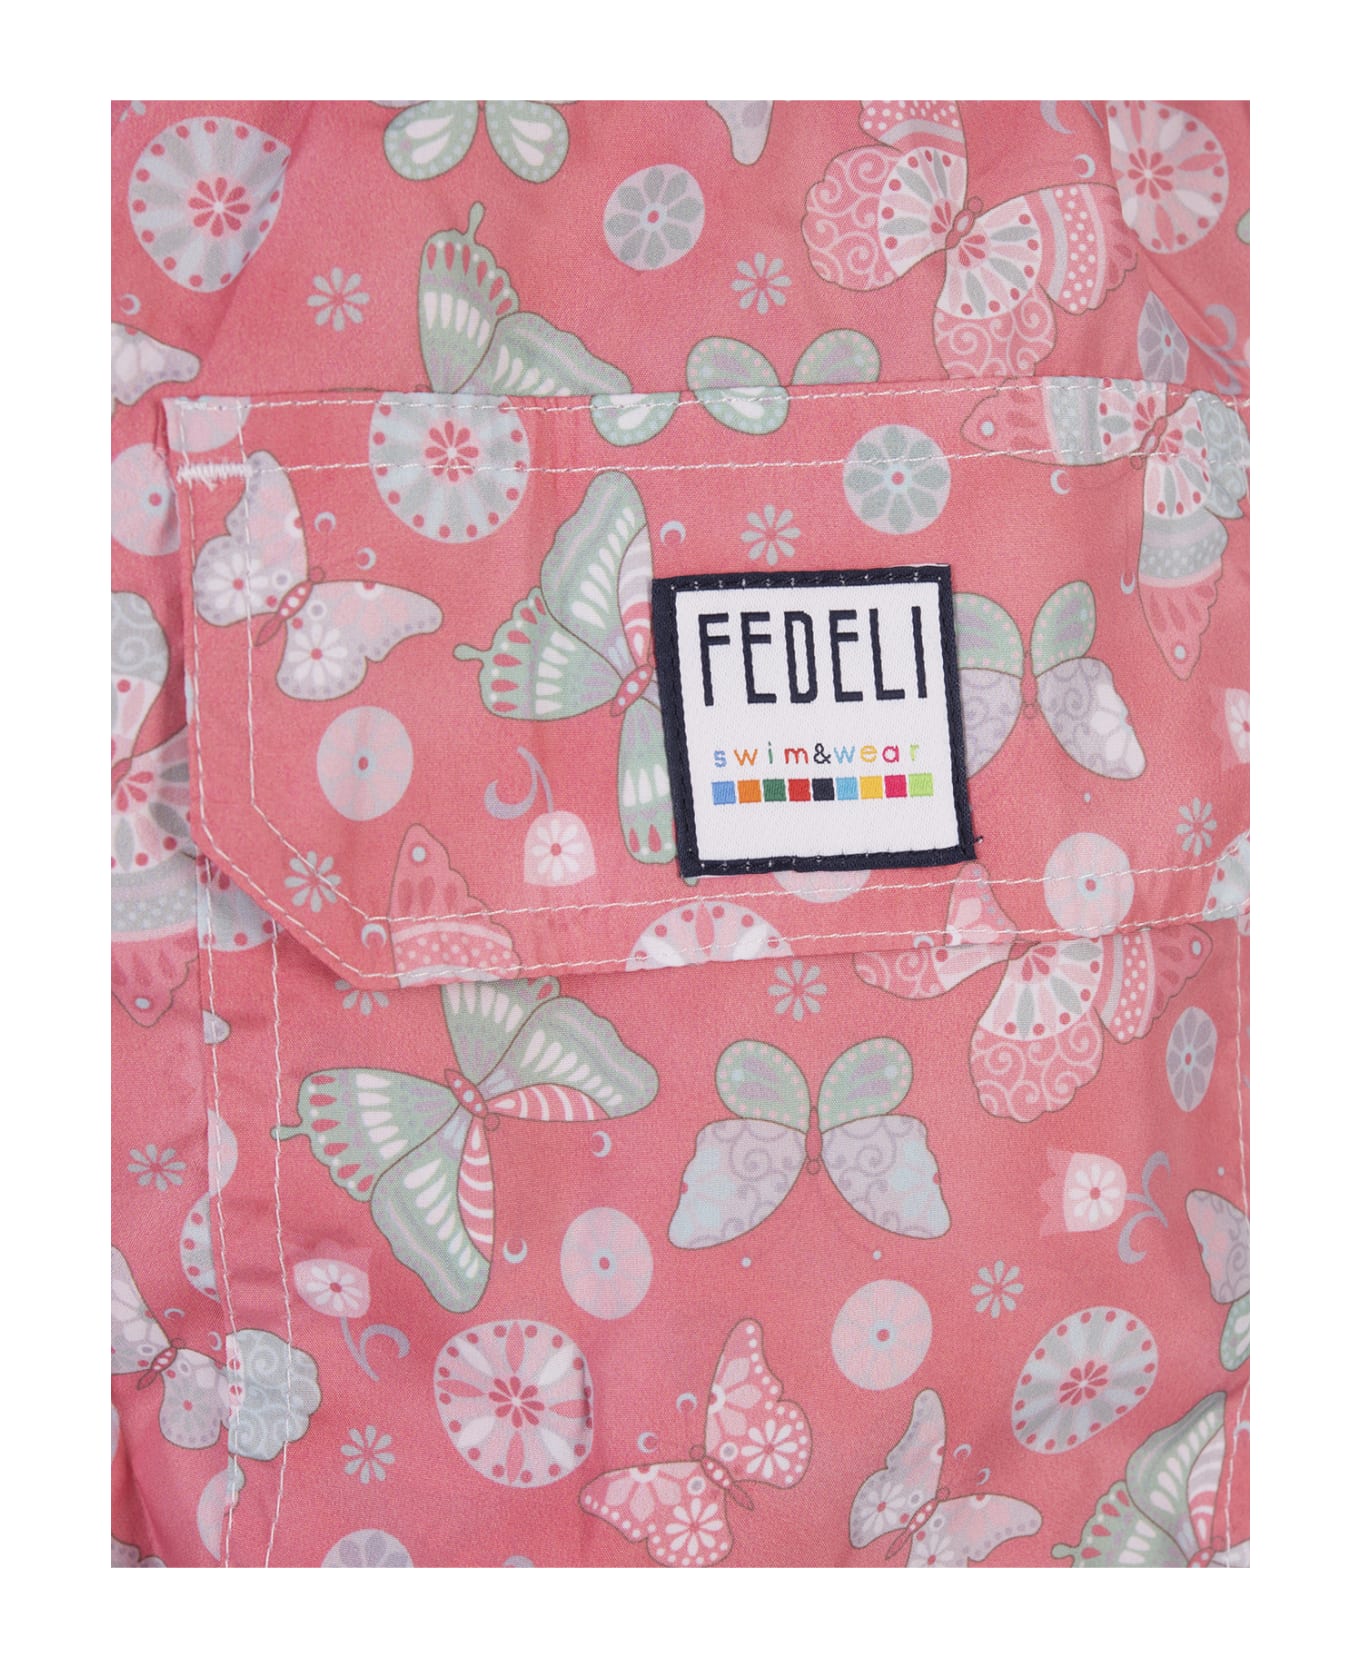 Fedeli Pink Swim Shorts With Butterfly Print - Pink スイムトランクス